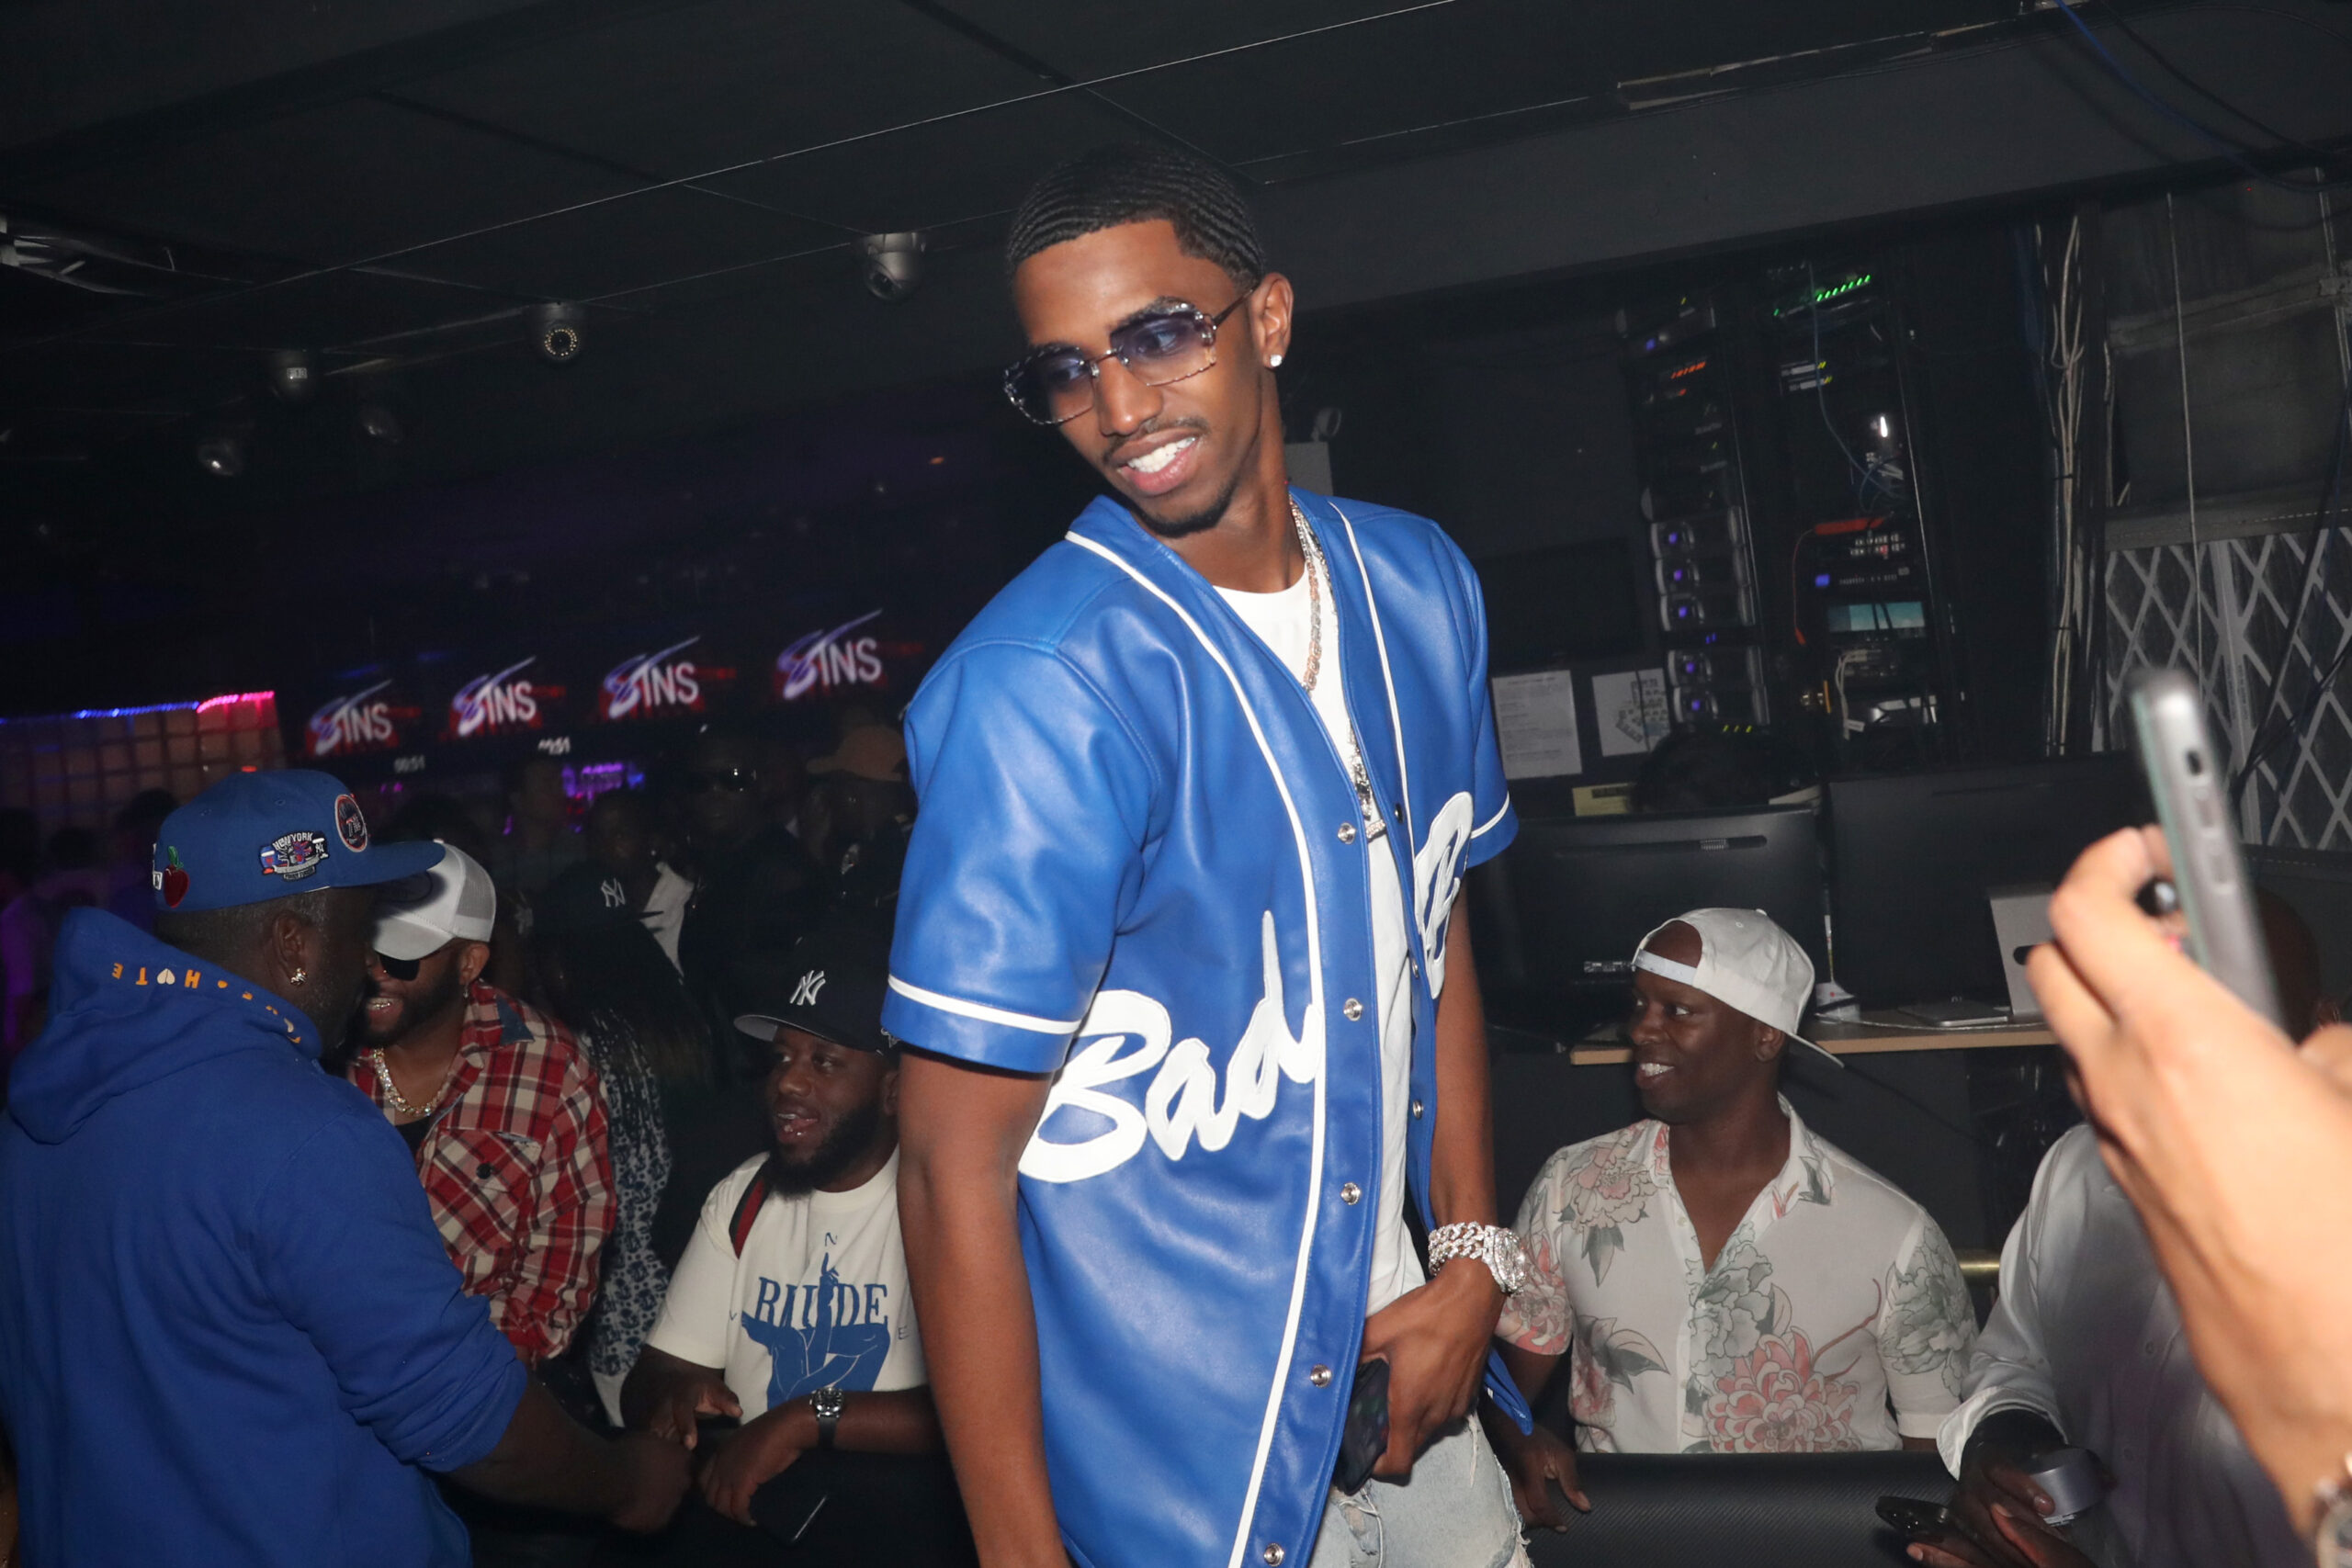 Diddy’s Son King Combs Weighs In on Whether Dinner with Jay-Z Over $500K Debate